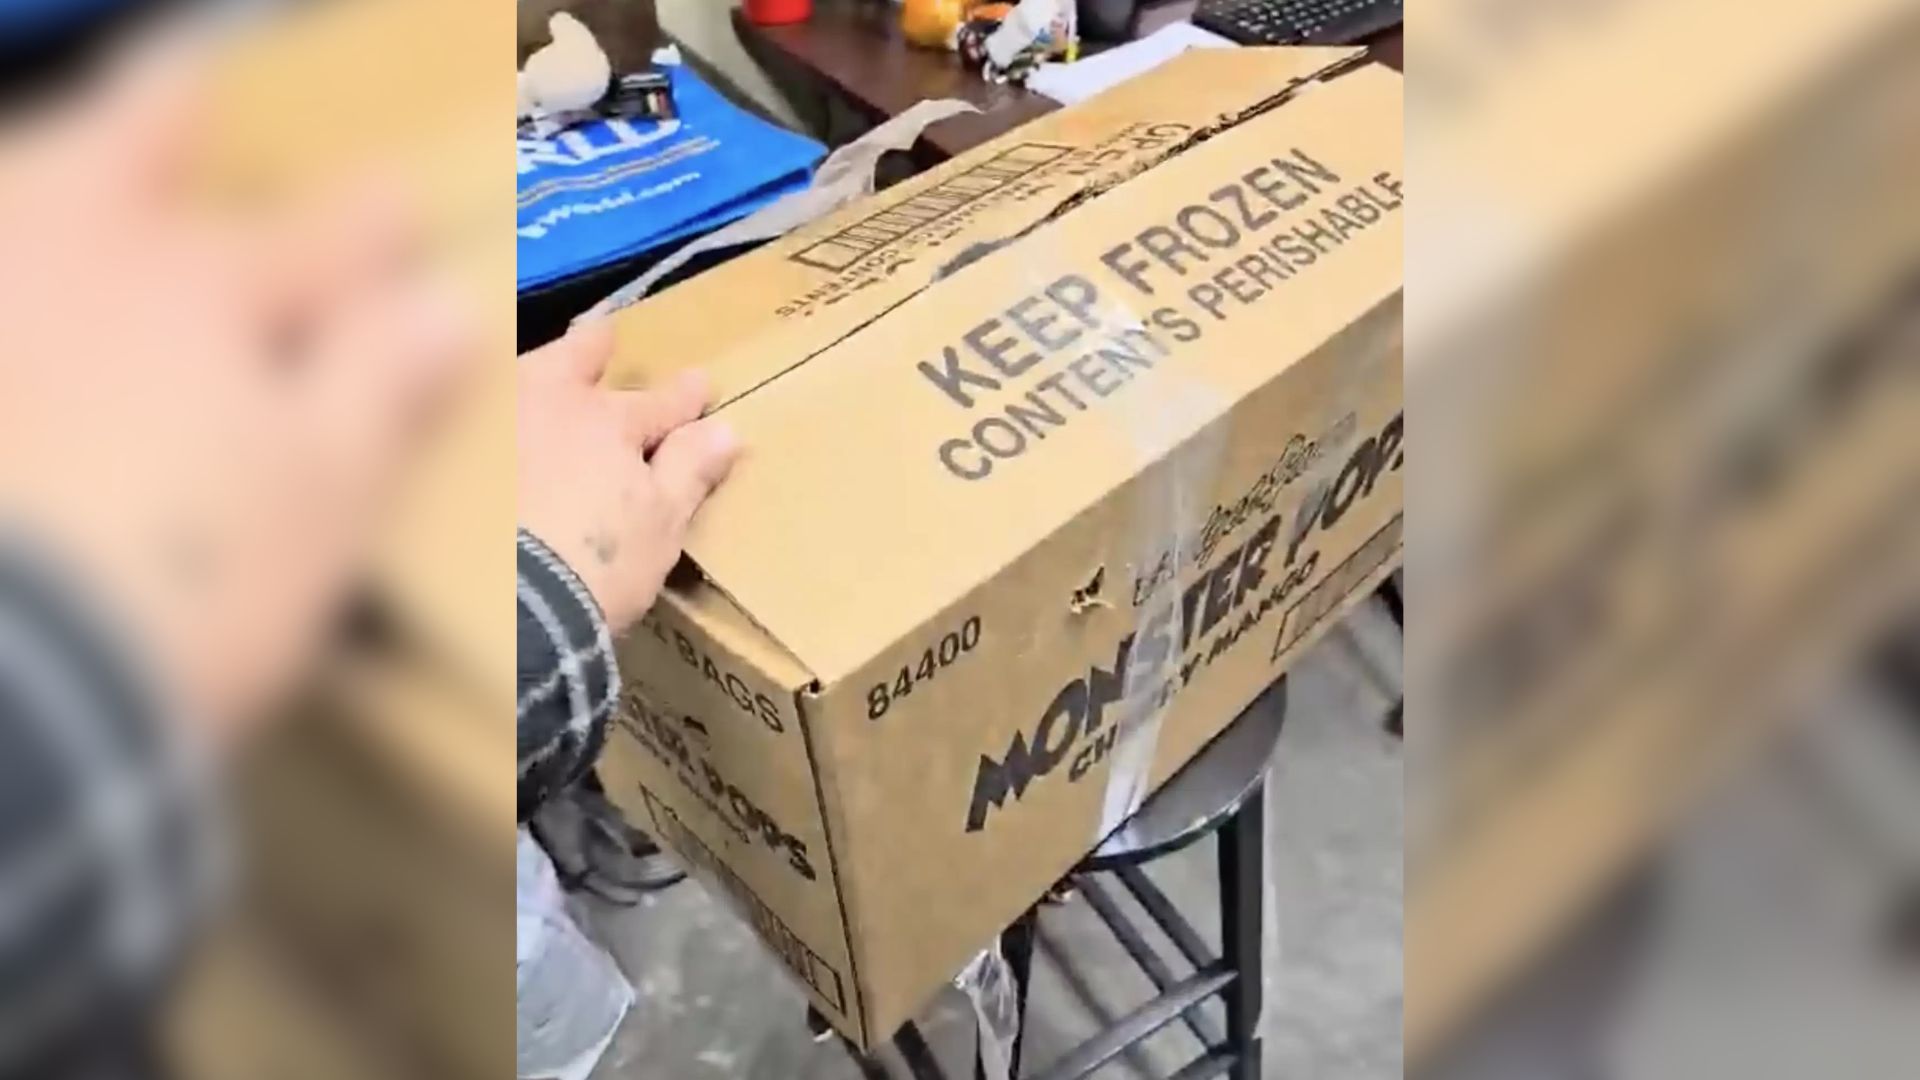 Shelter Workers Were Startled When They Found A Sealed Cardboard Box With “Someone” Inside